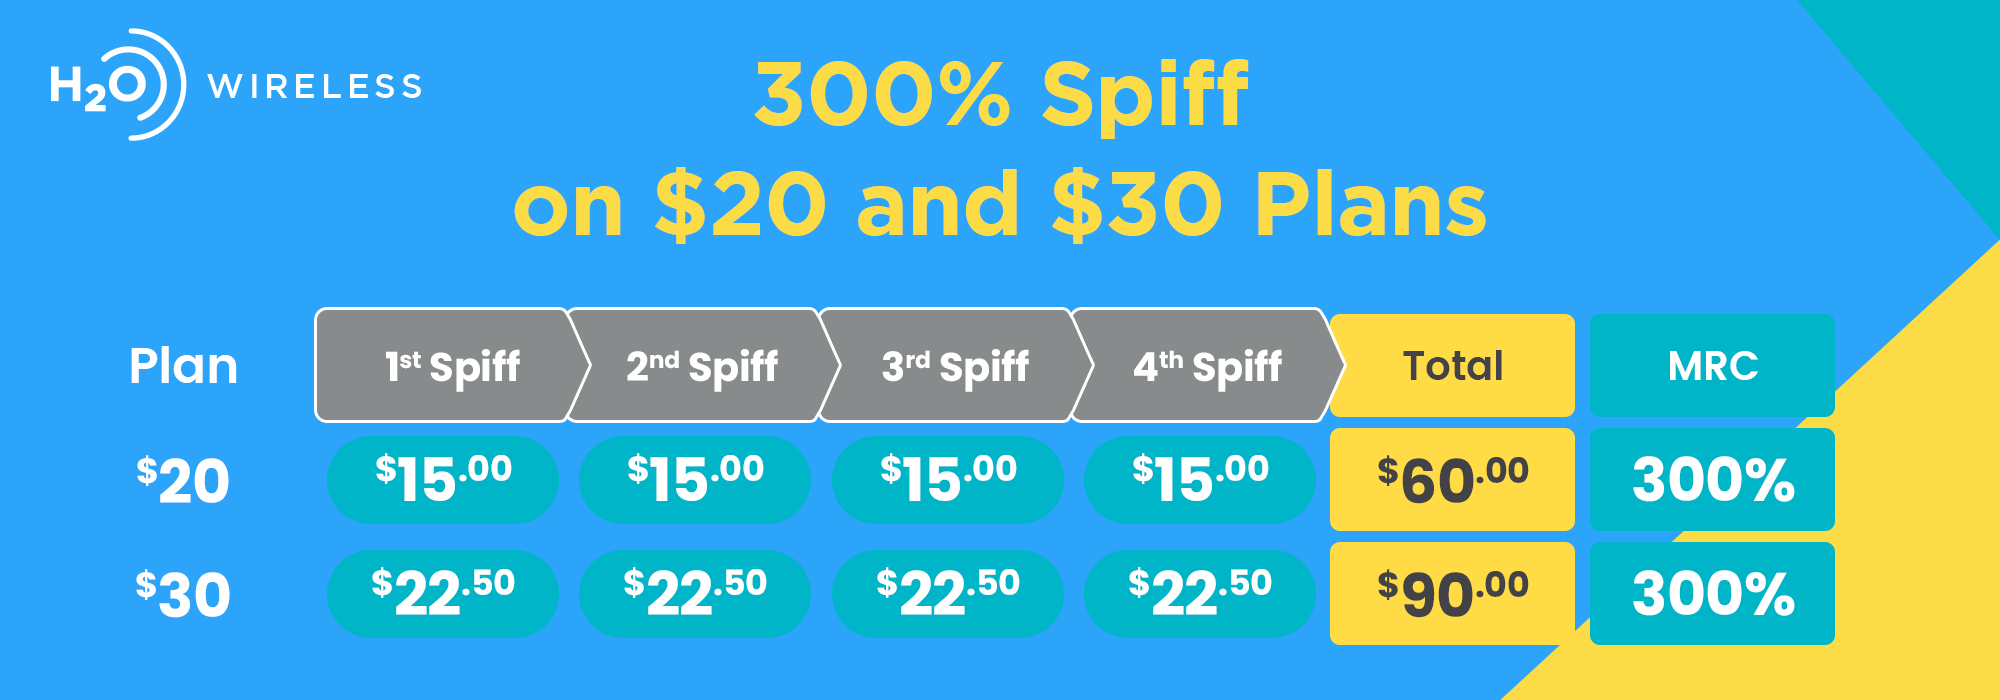 h2o, prepaid, new $50 LTE unlimited more data plan earn up to 200% spiff - new h2o plan, up front commissions, RTR Discount, keep activation fee. New Spiff + RTR Discount - Simapay h2o number 1 master agent - Prepaid wholesale